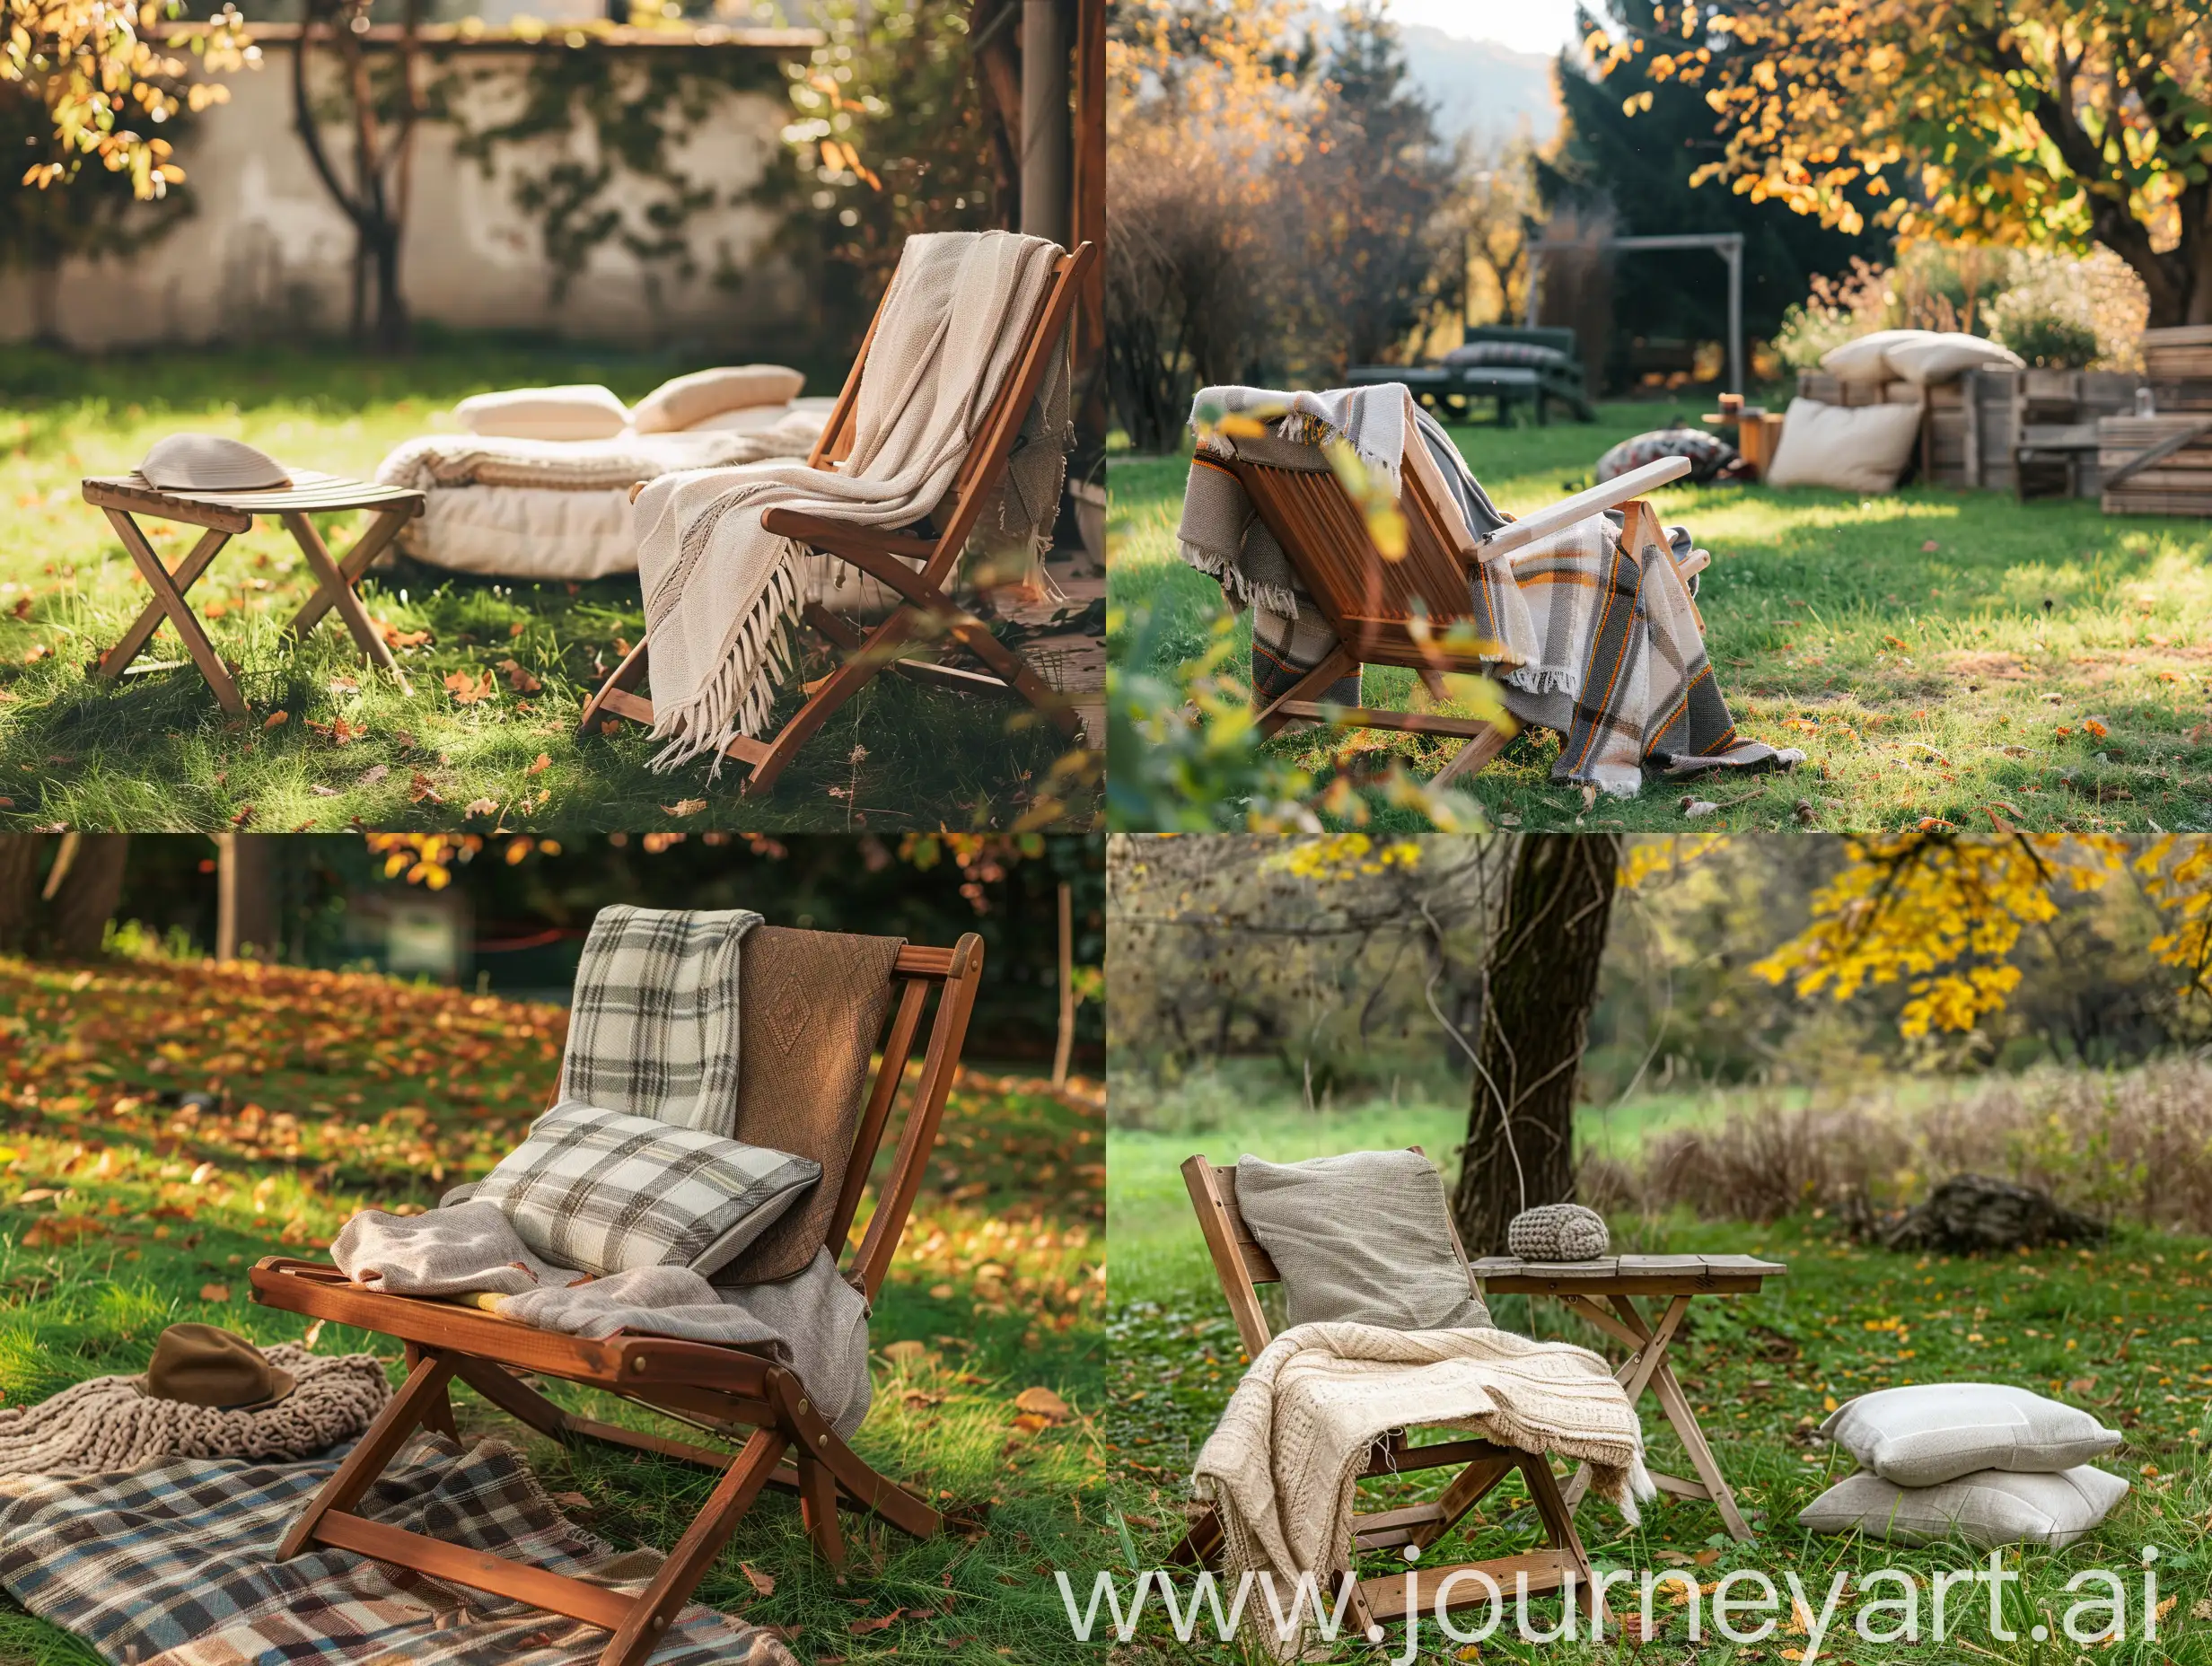 Outdoor garden wooden furniture at autumn nature, green grass. Nobody at home backyard with chair, lounge. Relax at outside terrace with blankets, pillows at retro, vintage decoration